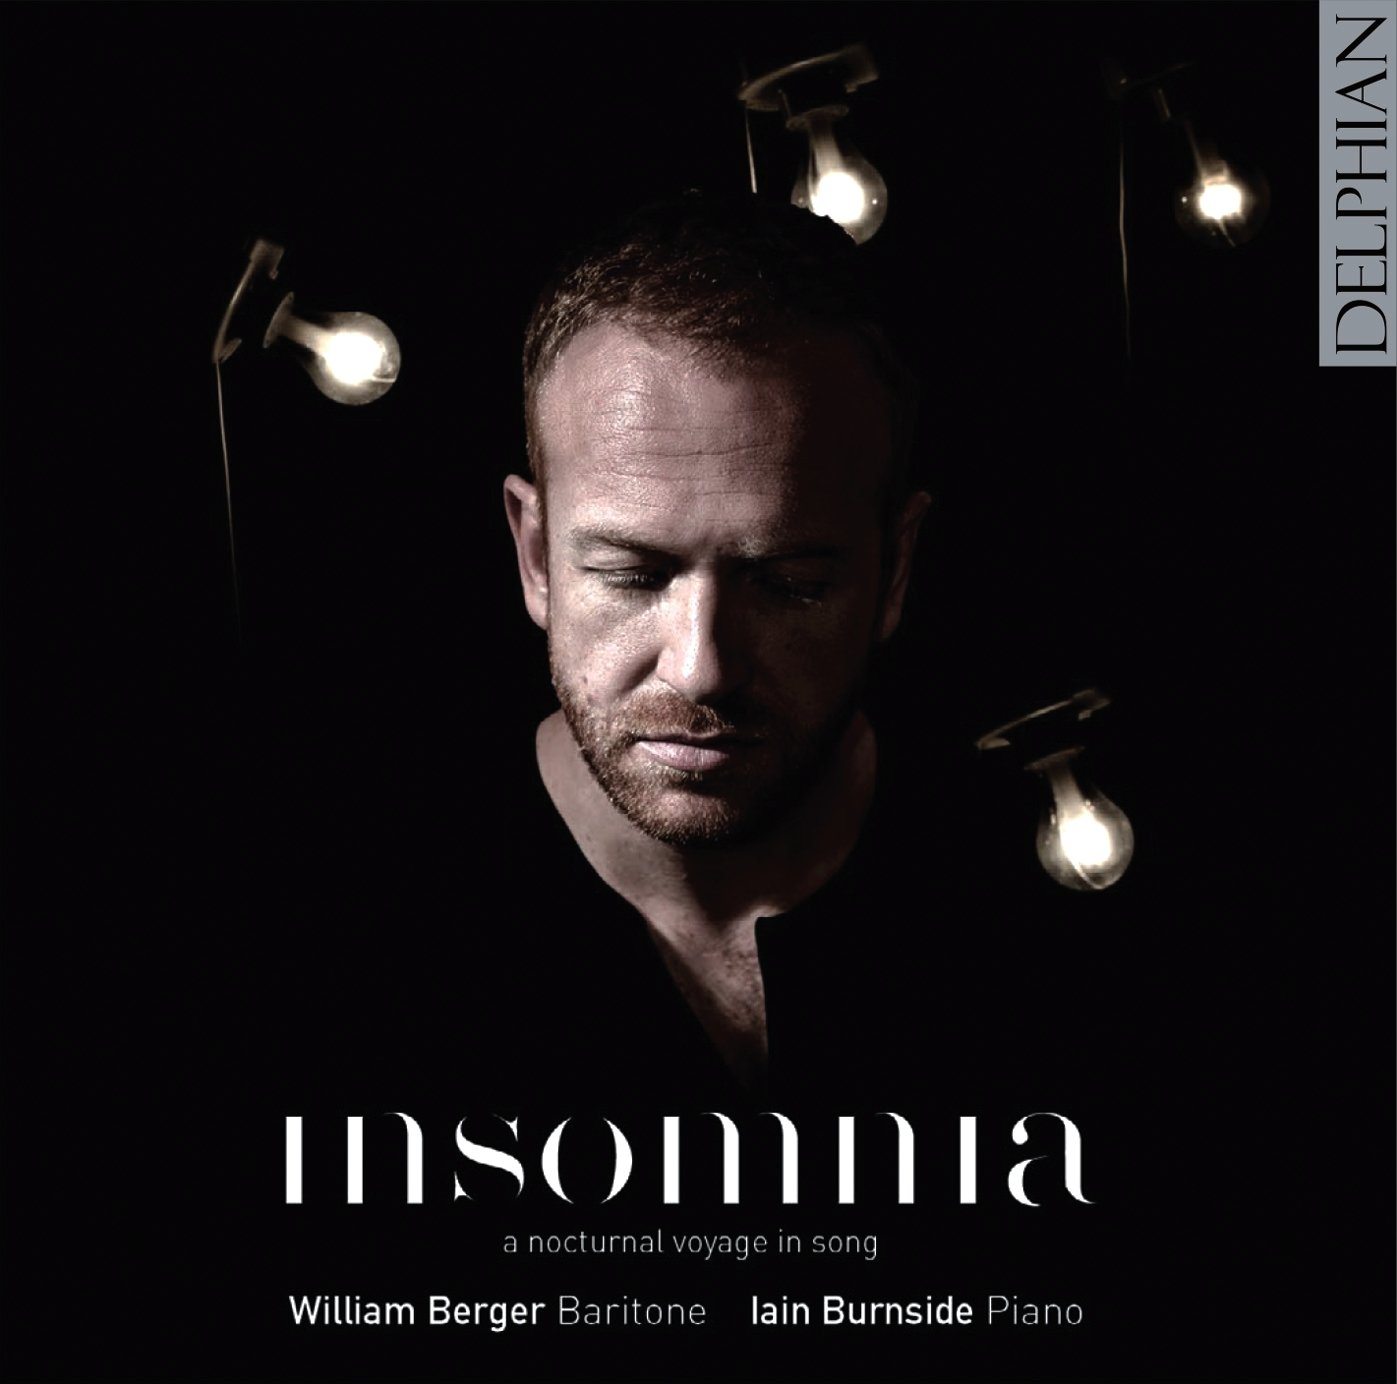 Insomnia: a nocturnal voyage in song CD Delphian Records